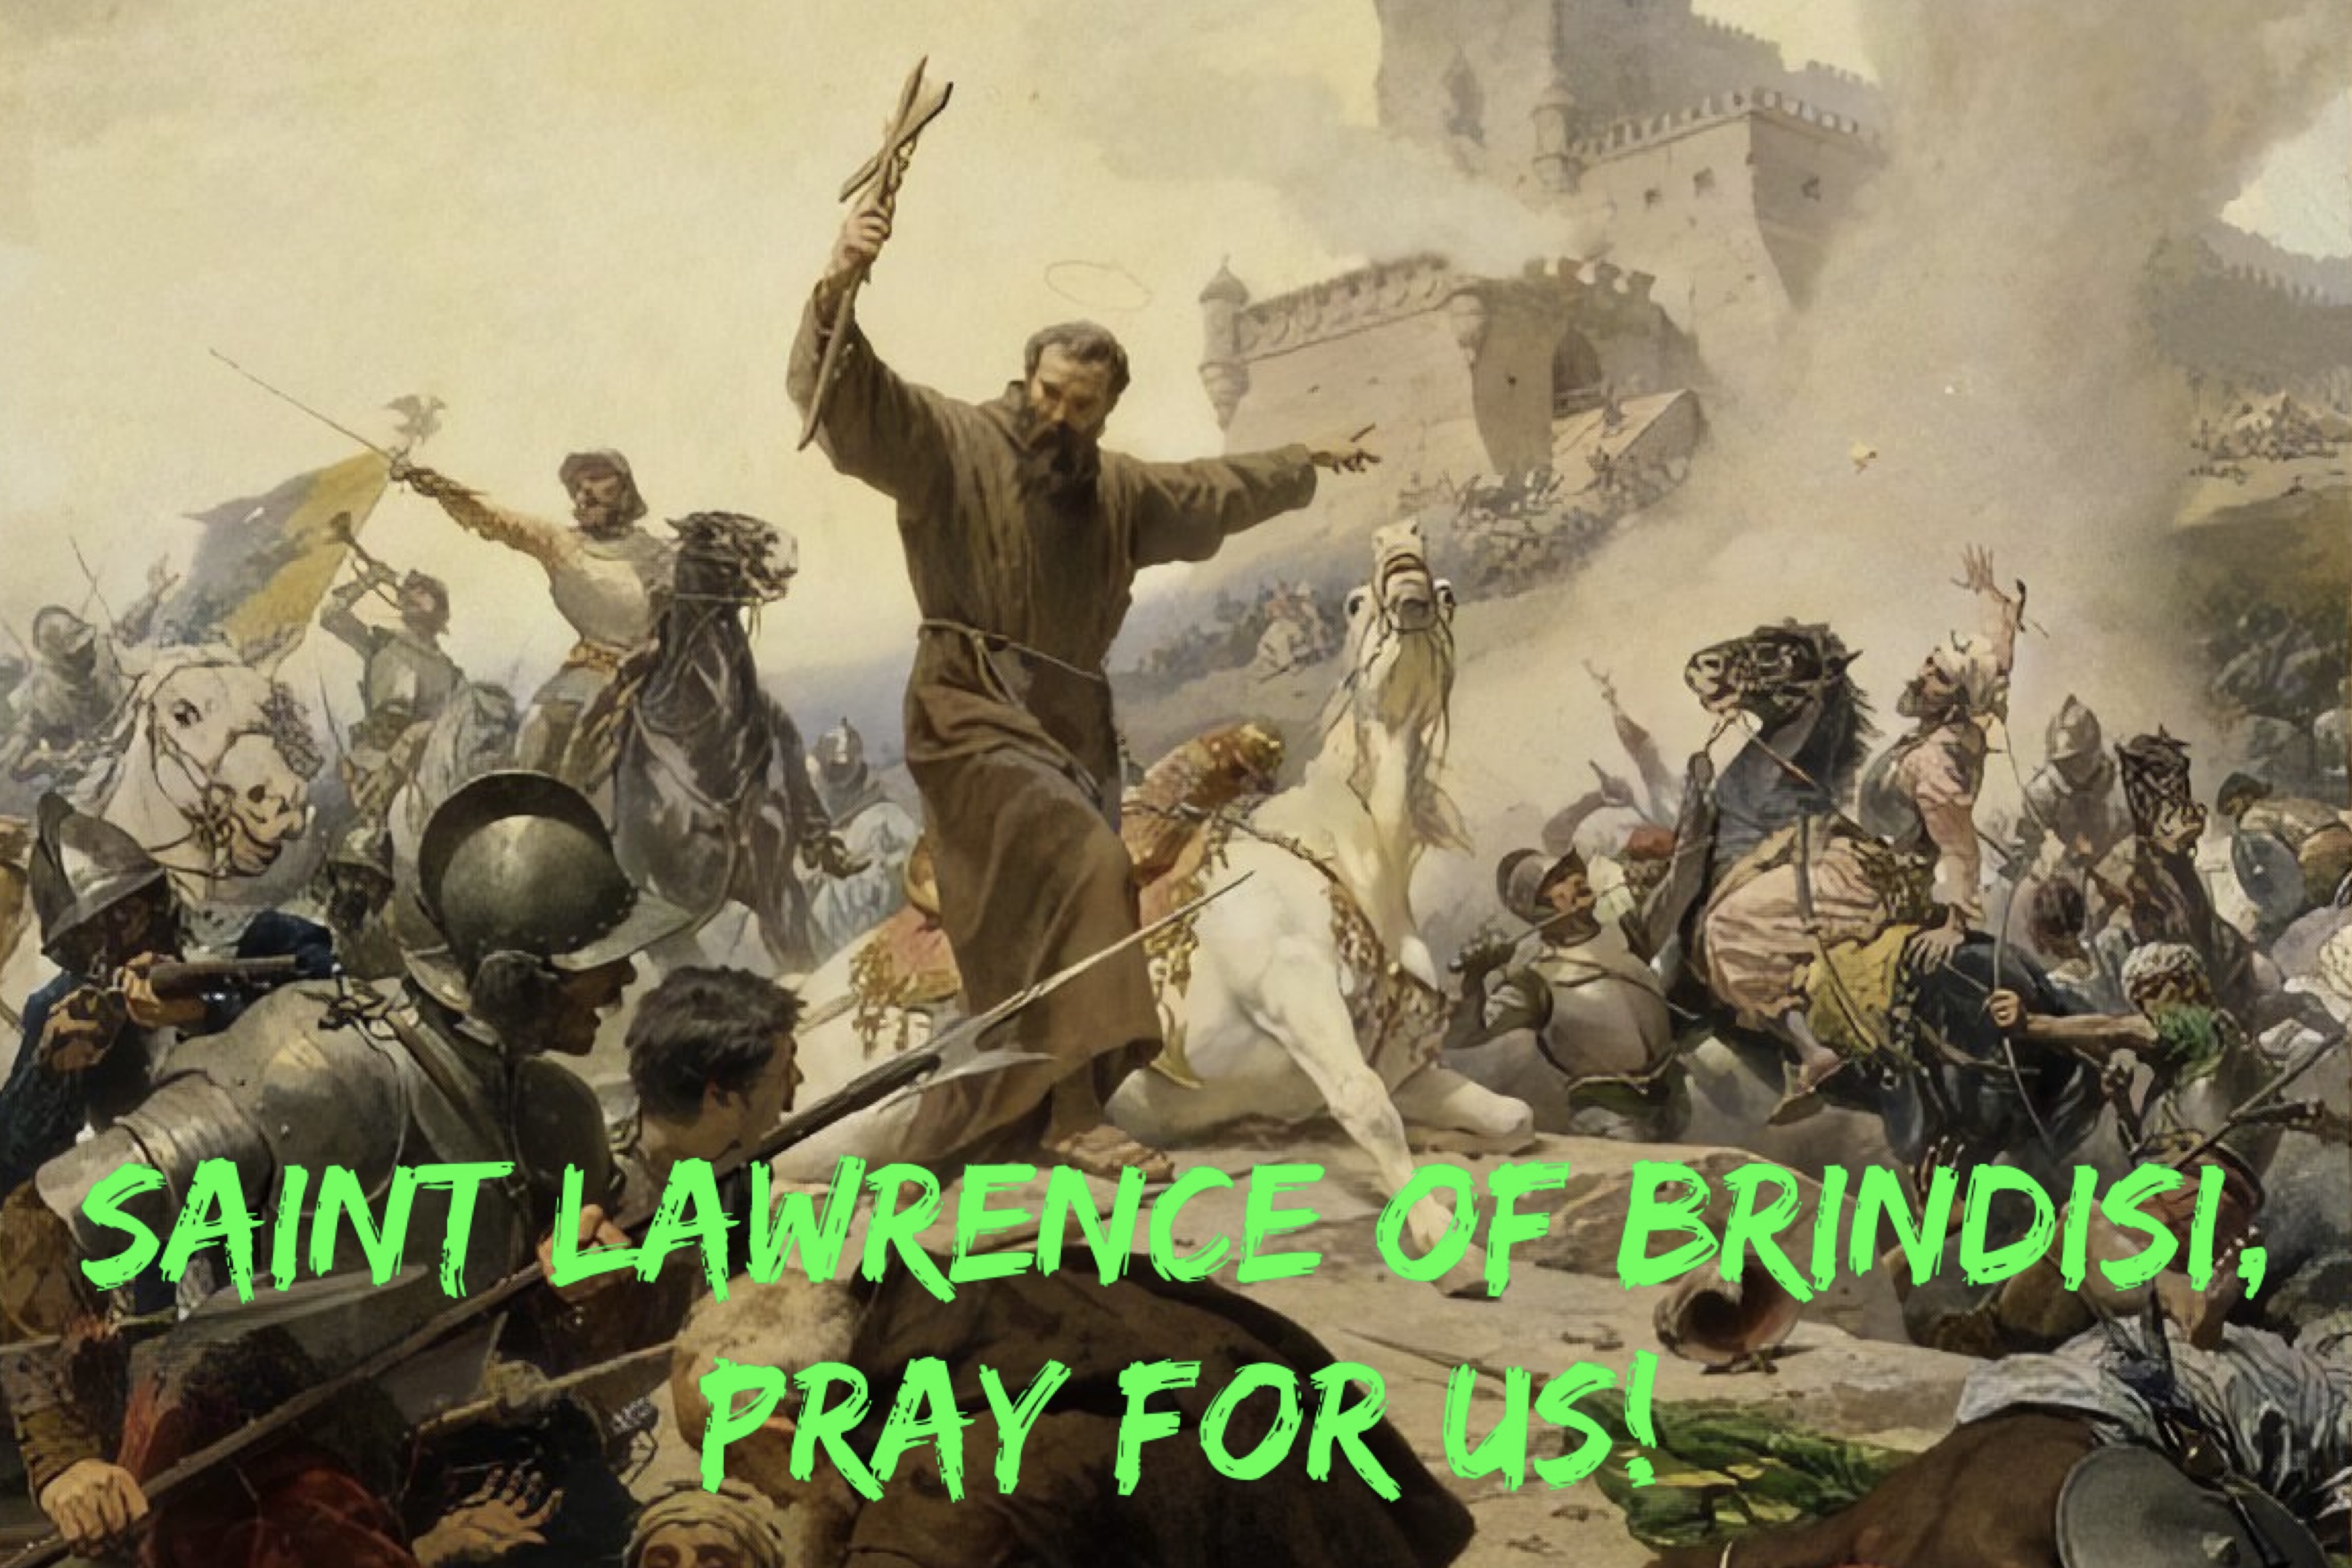 21st July – Saint Lawrence of Brindisi